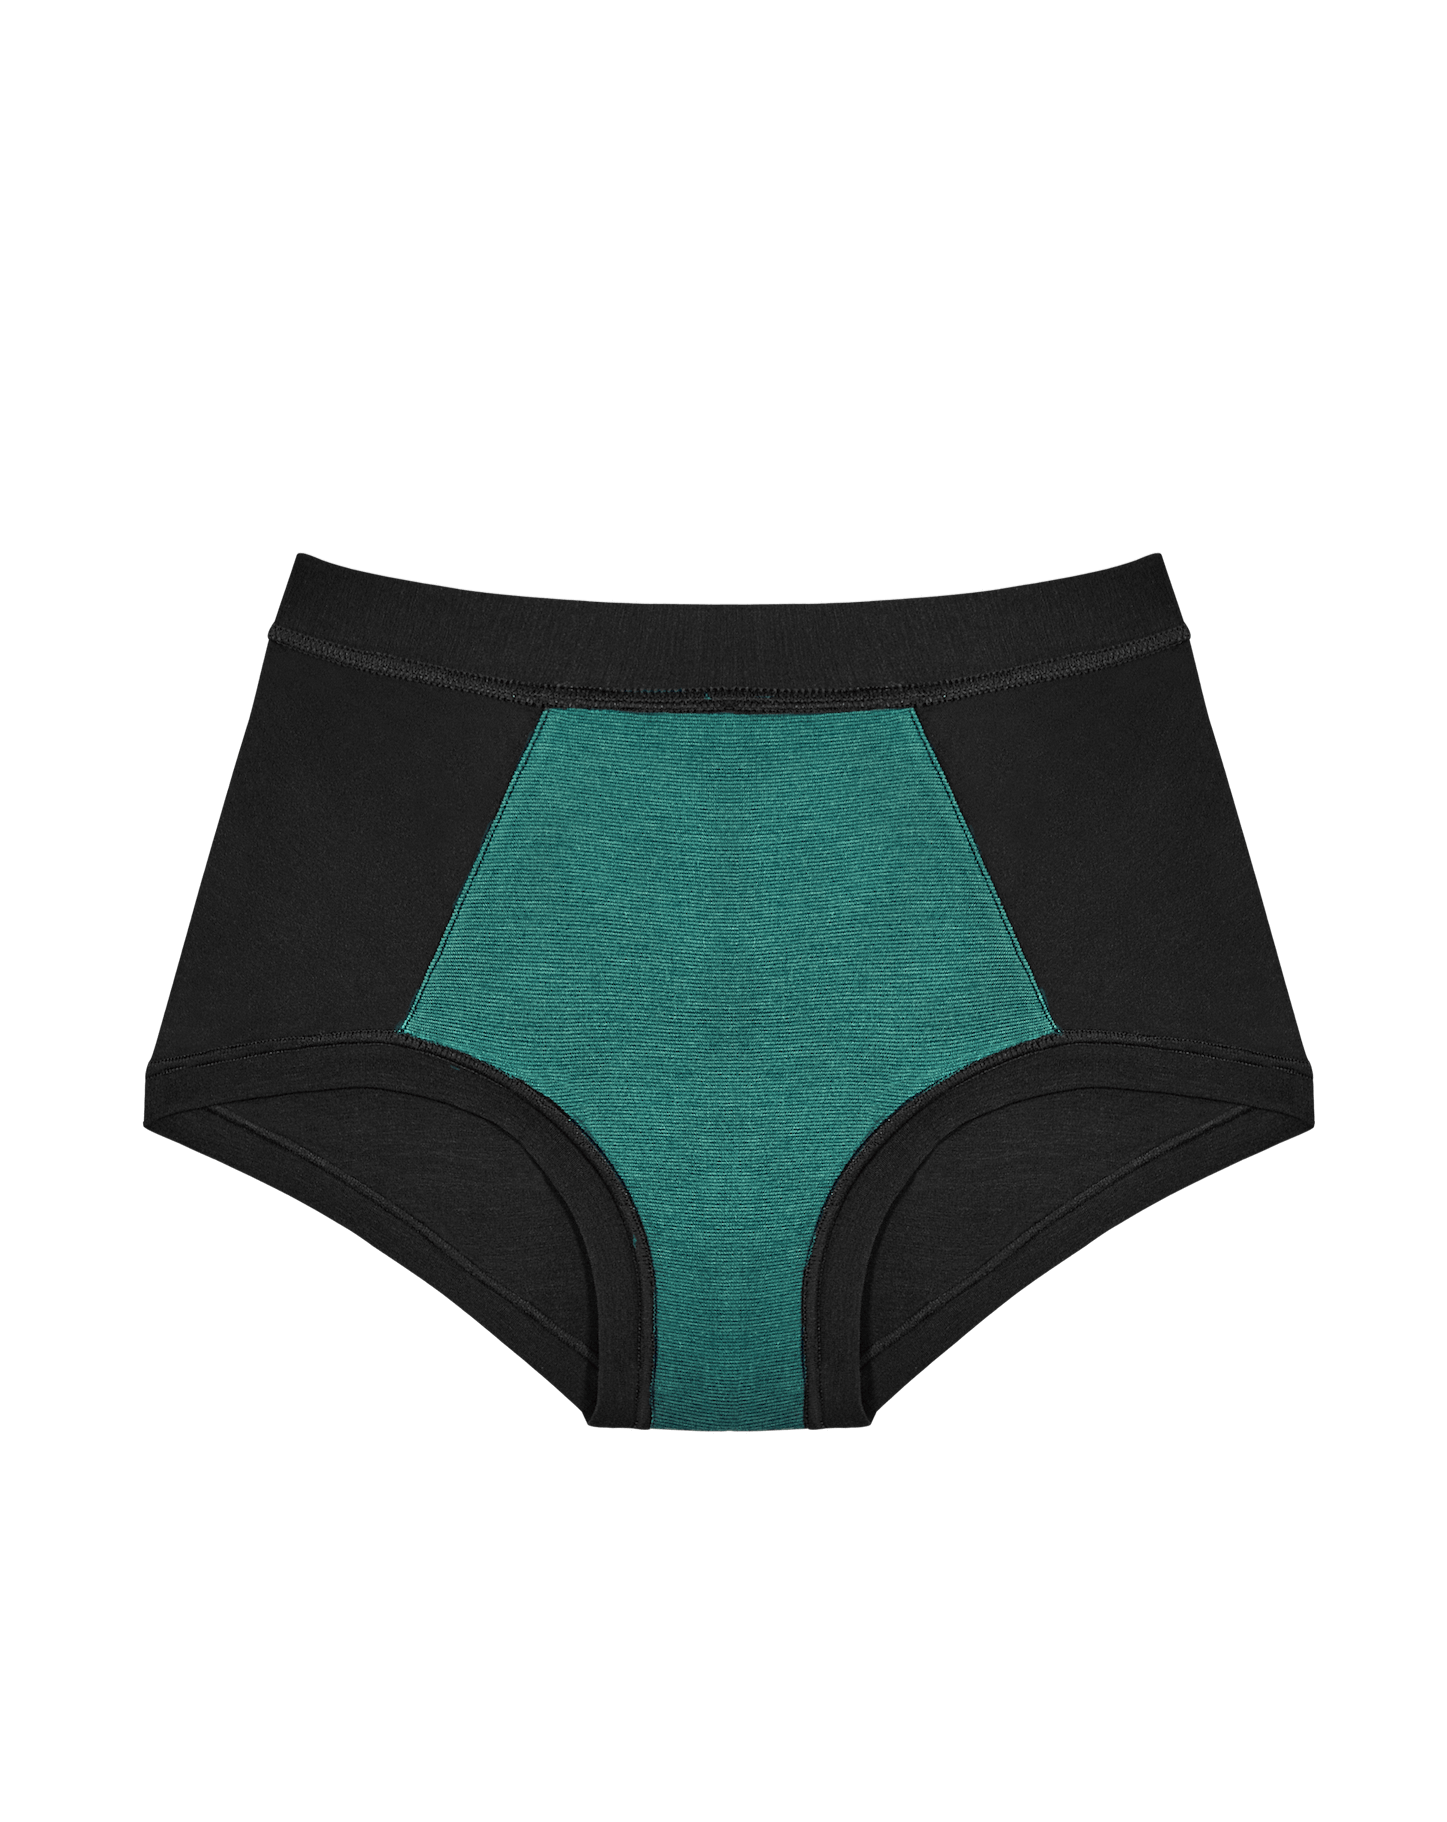 HUHA MINERAL UNDIES review + try on // Learn more about the BENEFITS of  mineral undies 